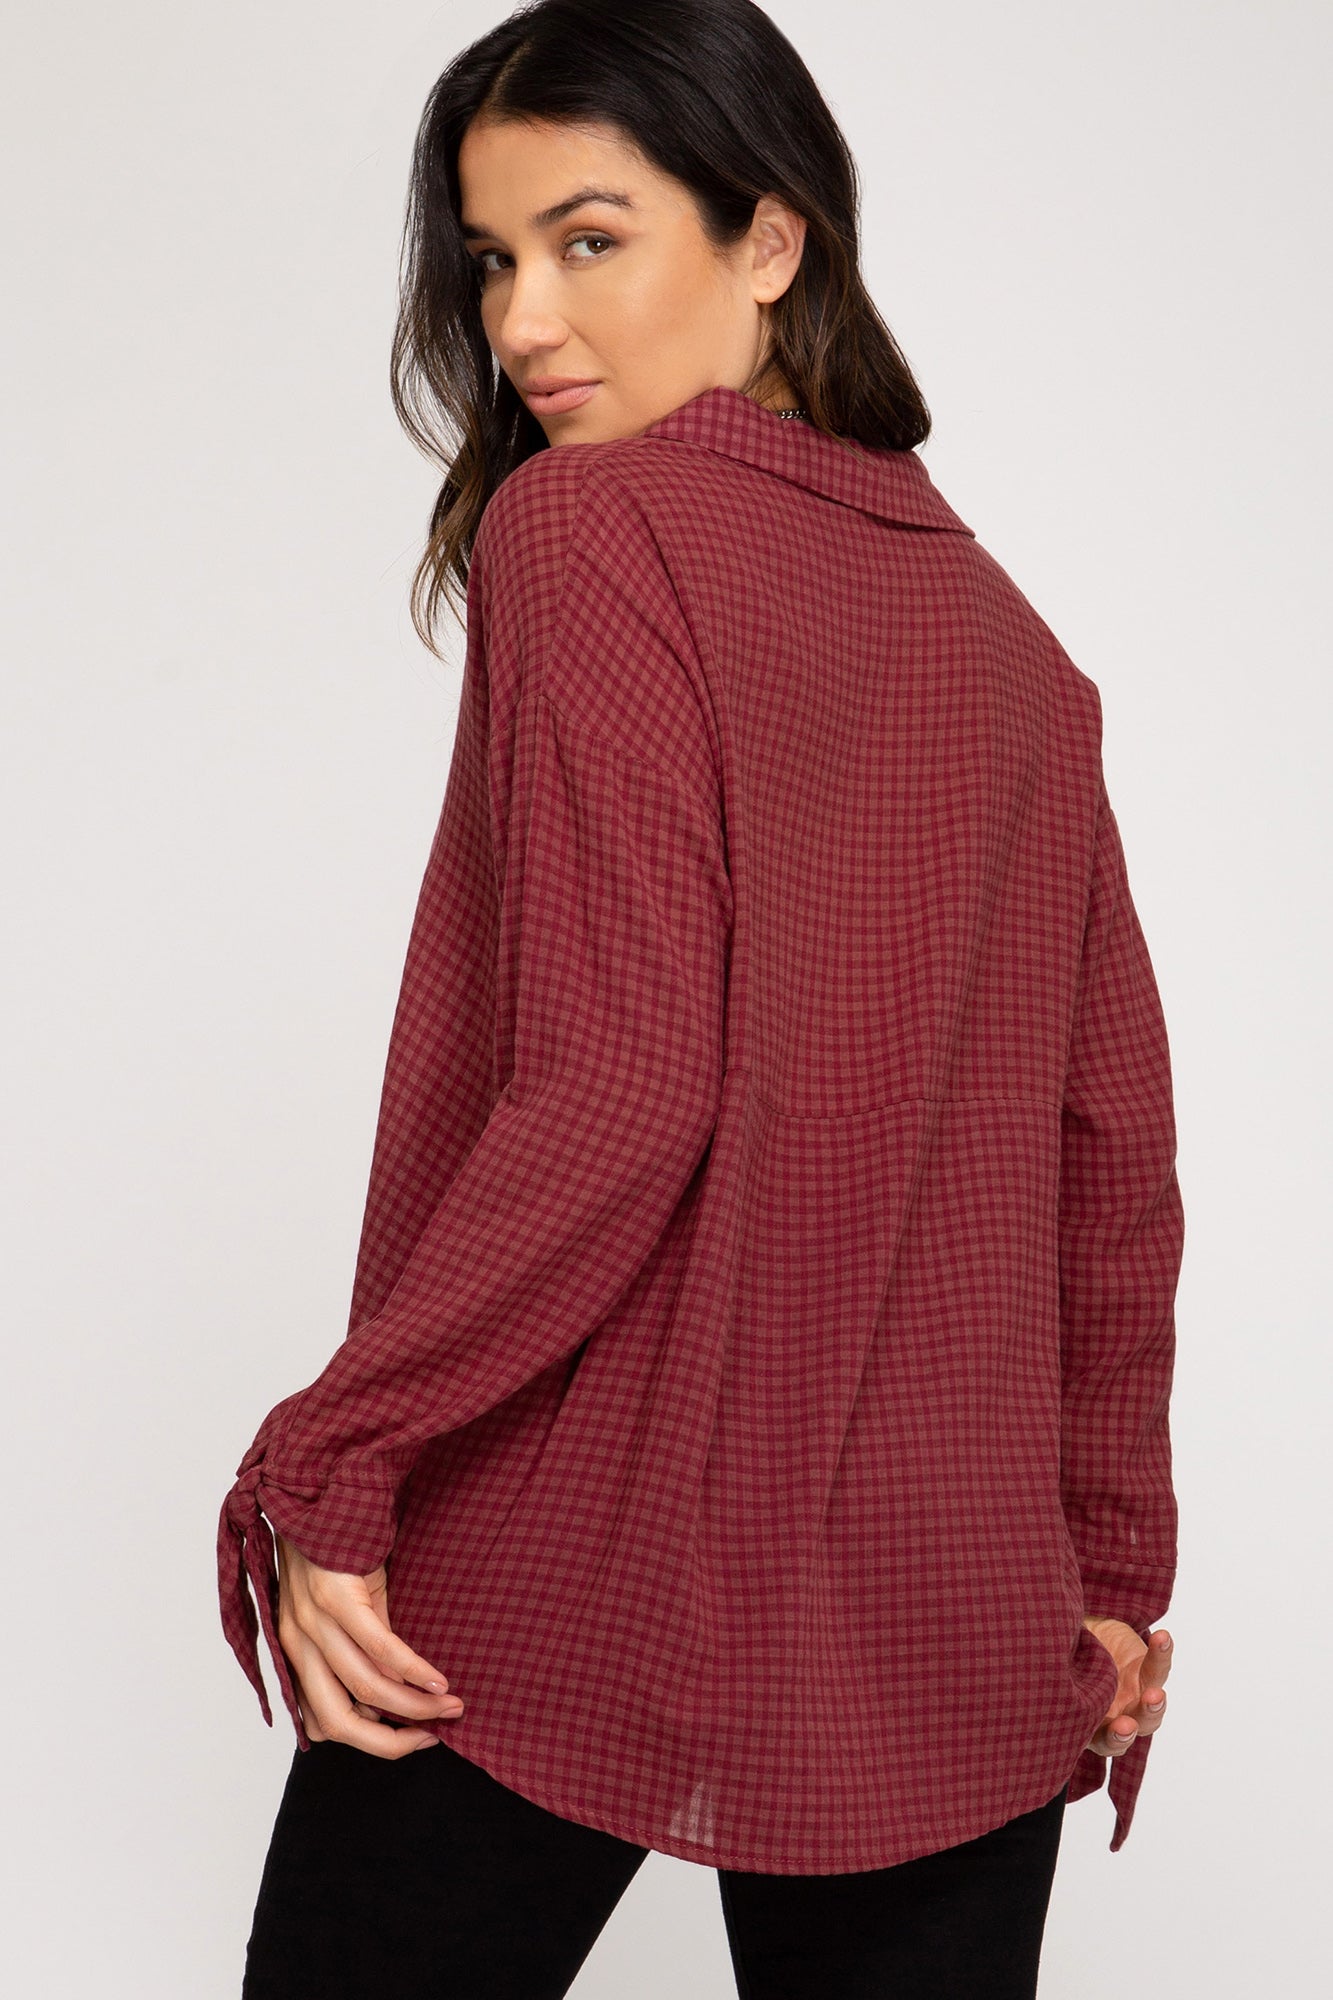 Long Sleeve Checkered Blouse!